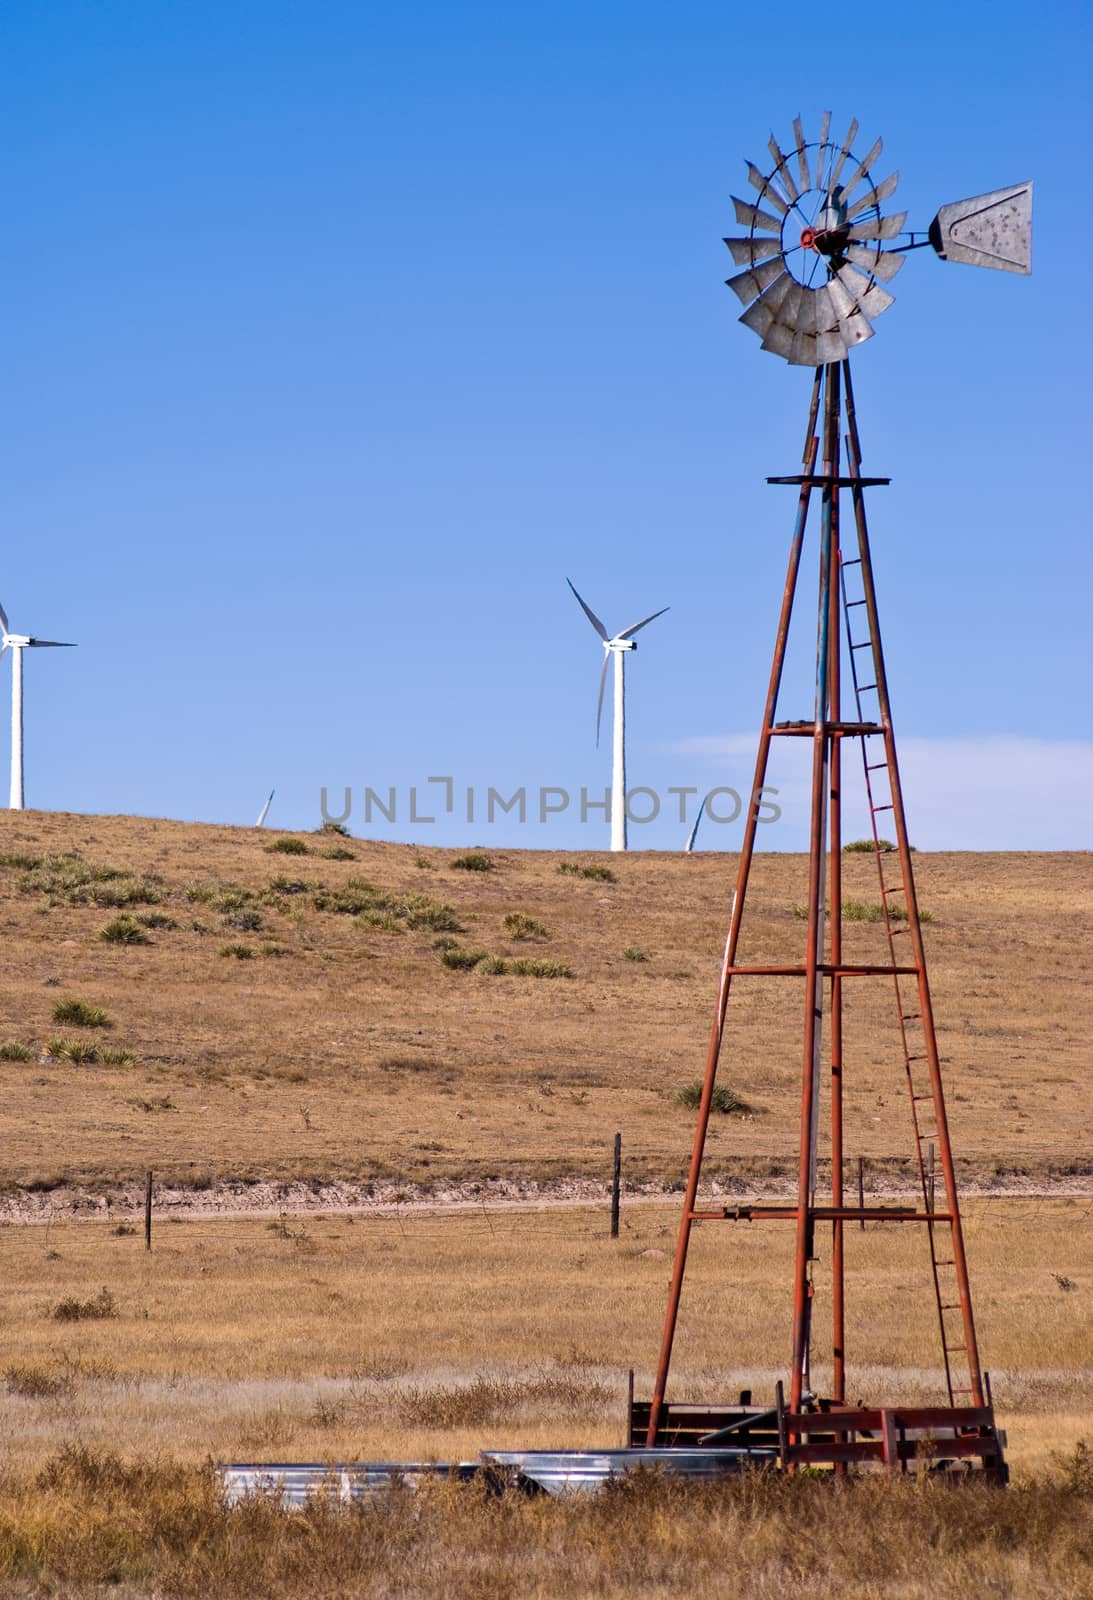 Windmill pumping water for livestock